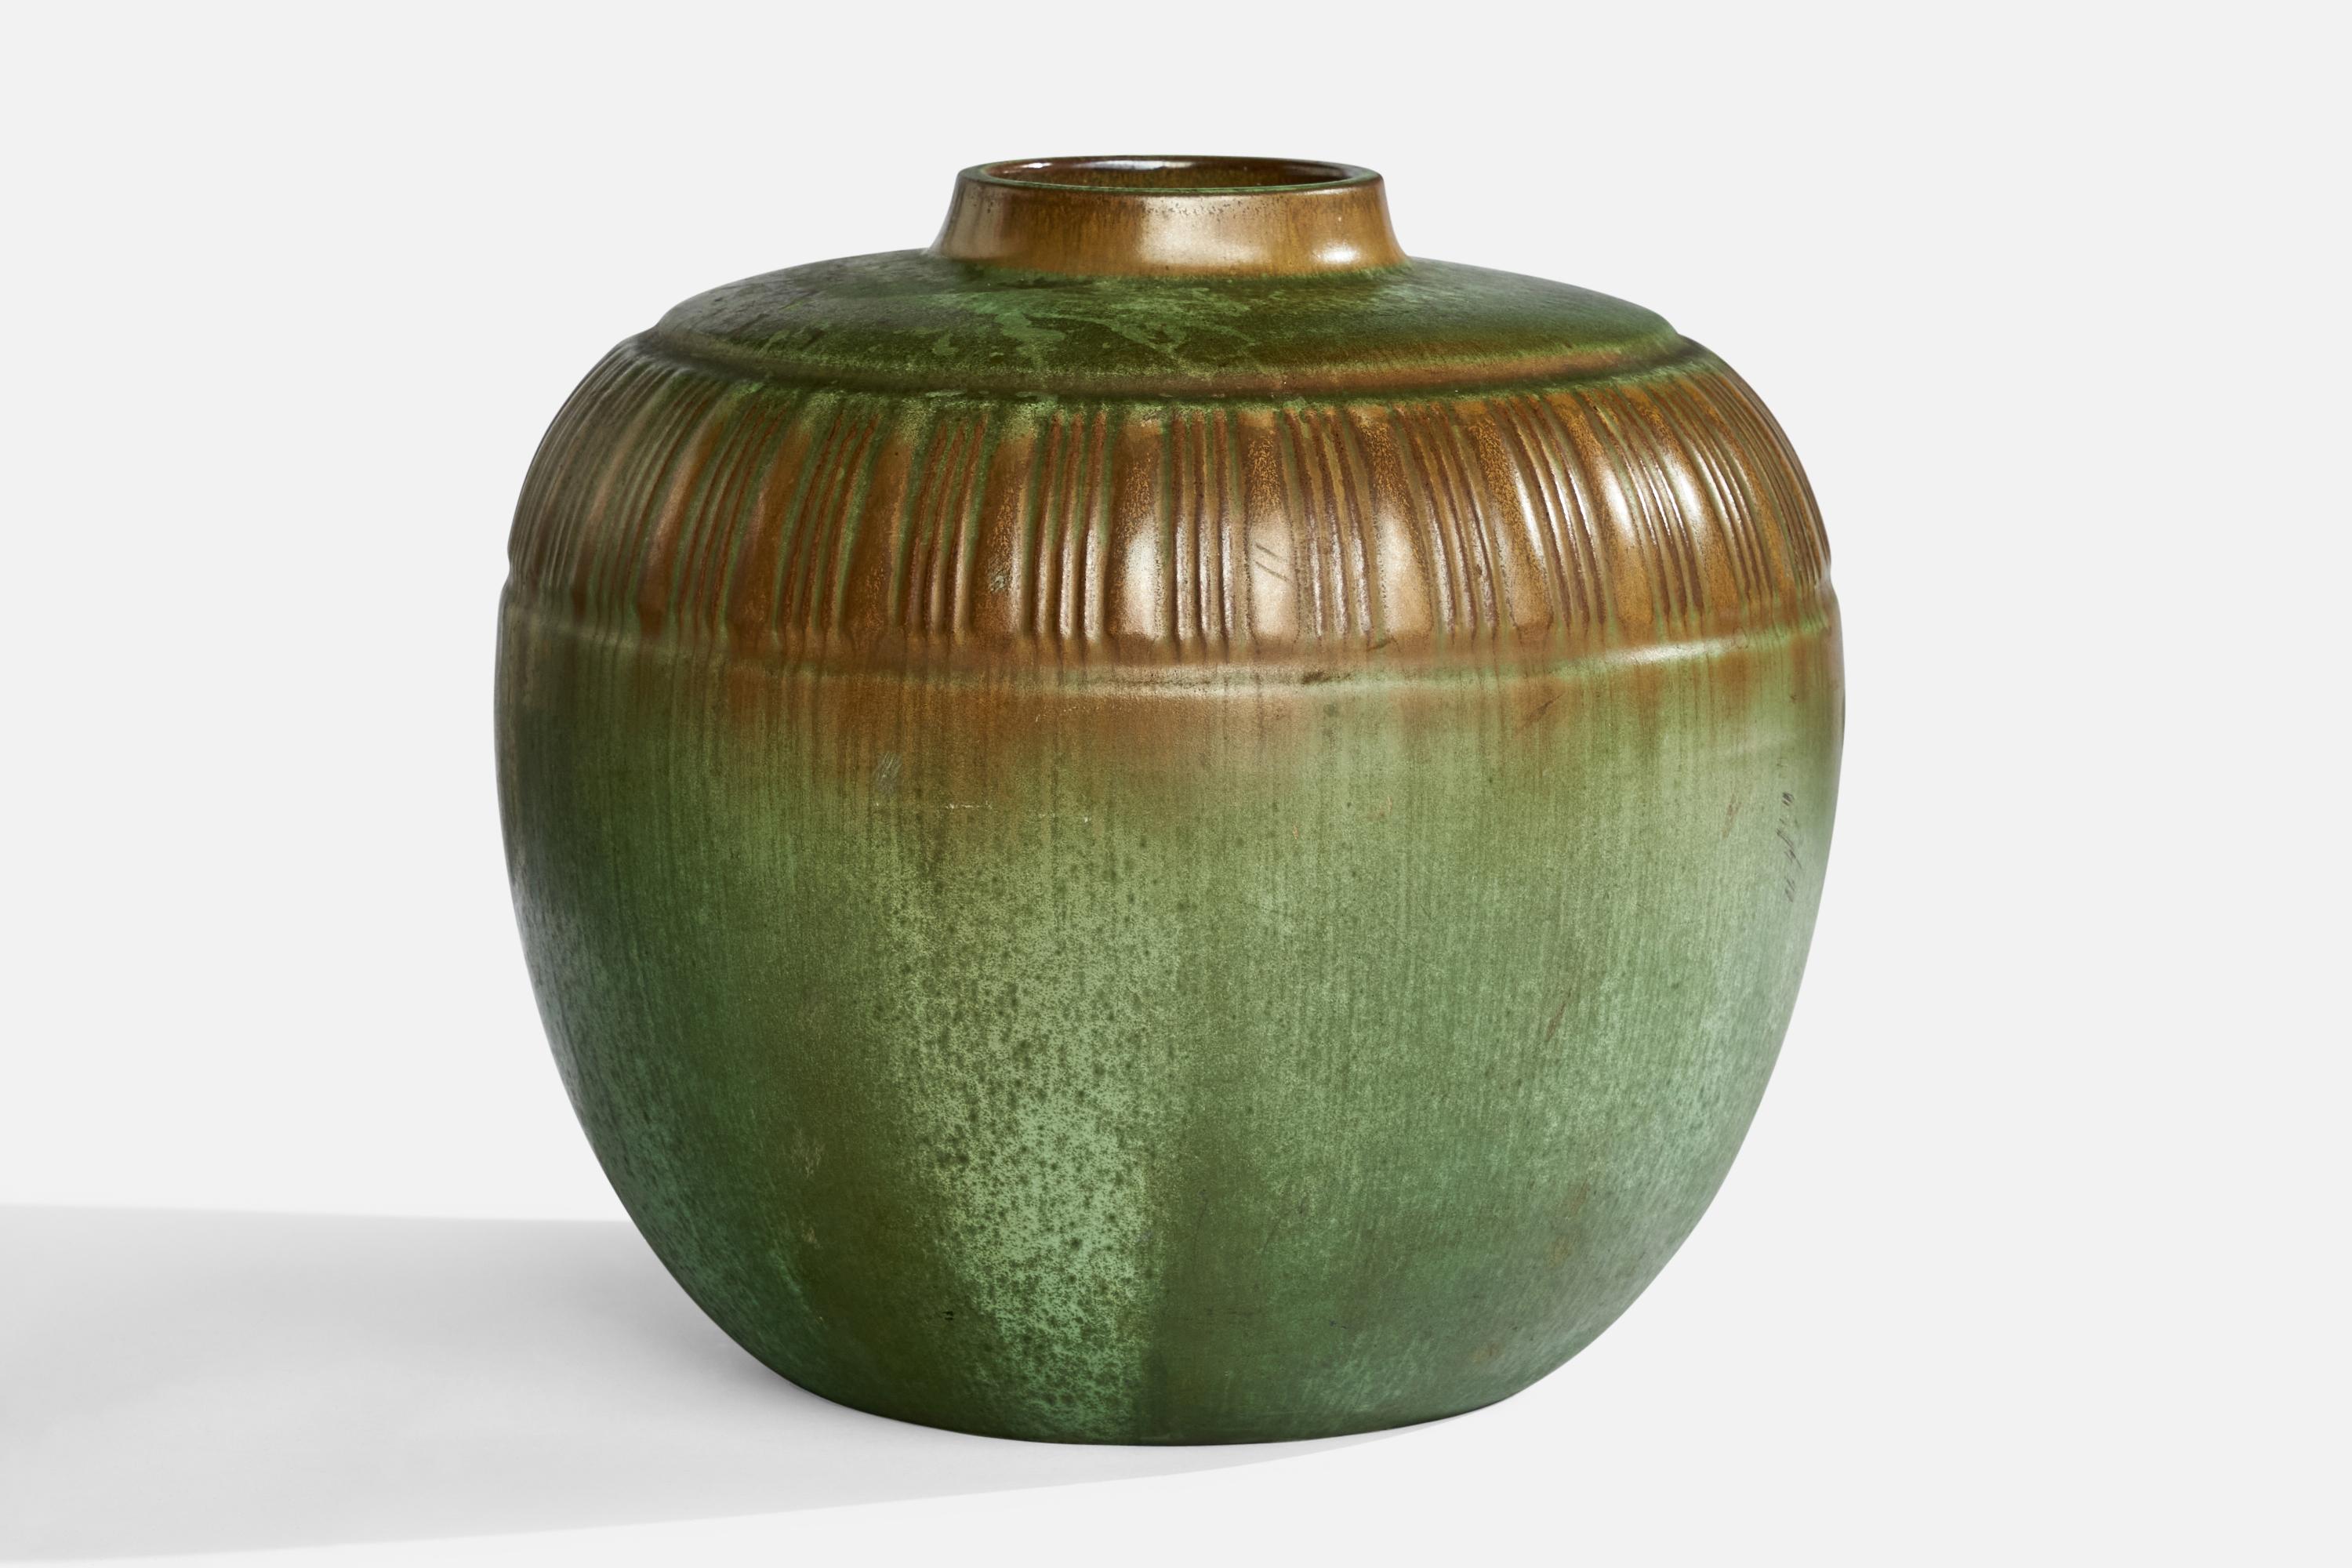 A green and brown-glazed incised vase designed and produced in Sweden, 1930s.